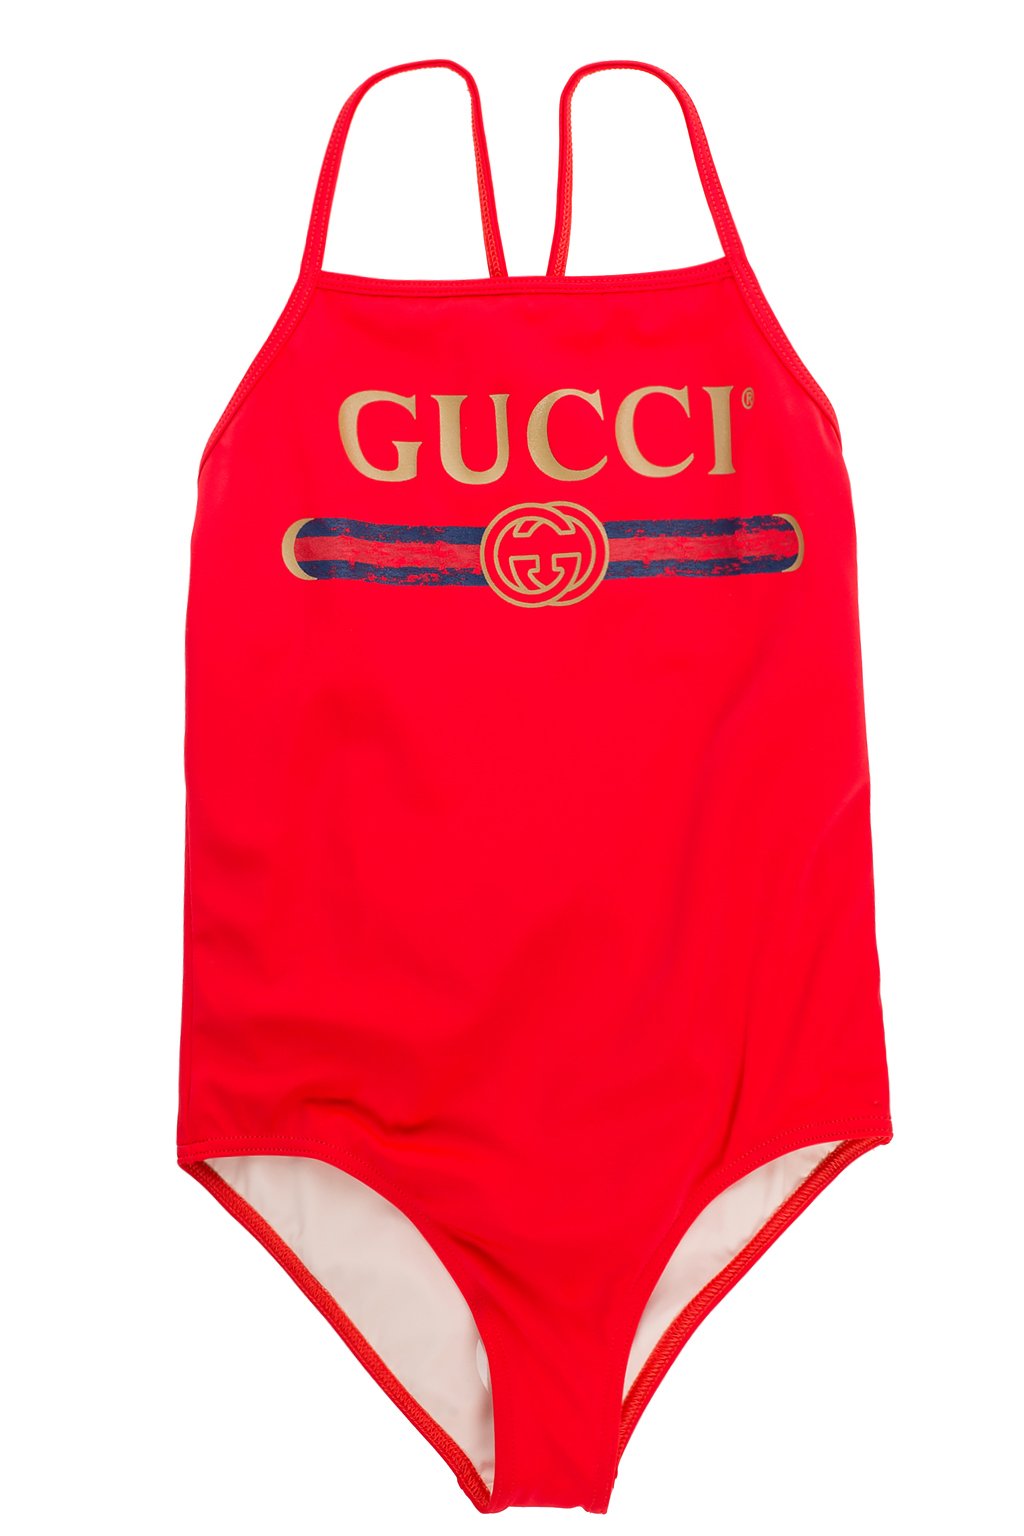 gucci swimsuit one piece